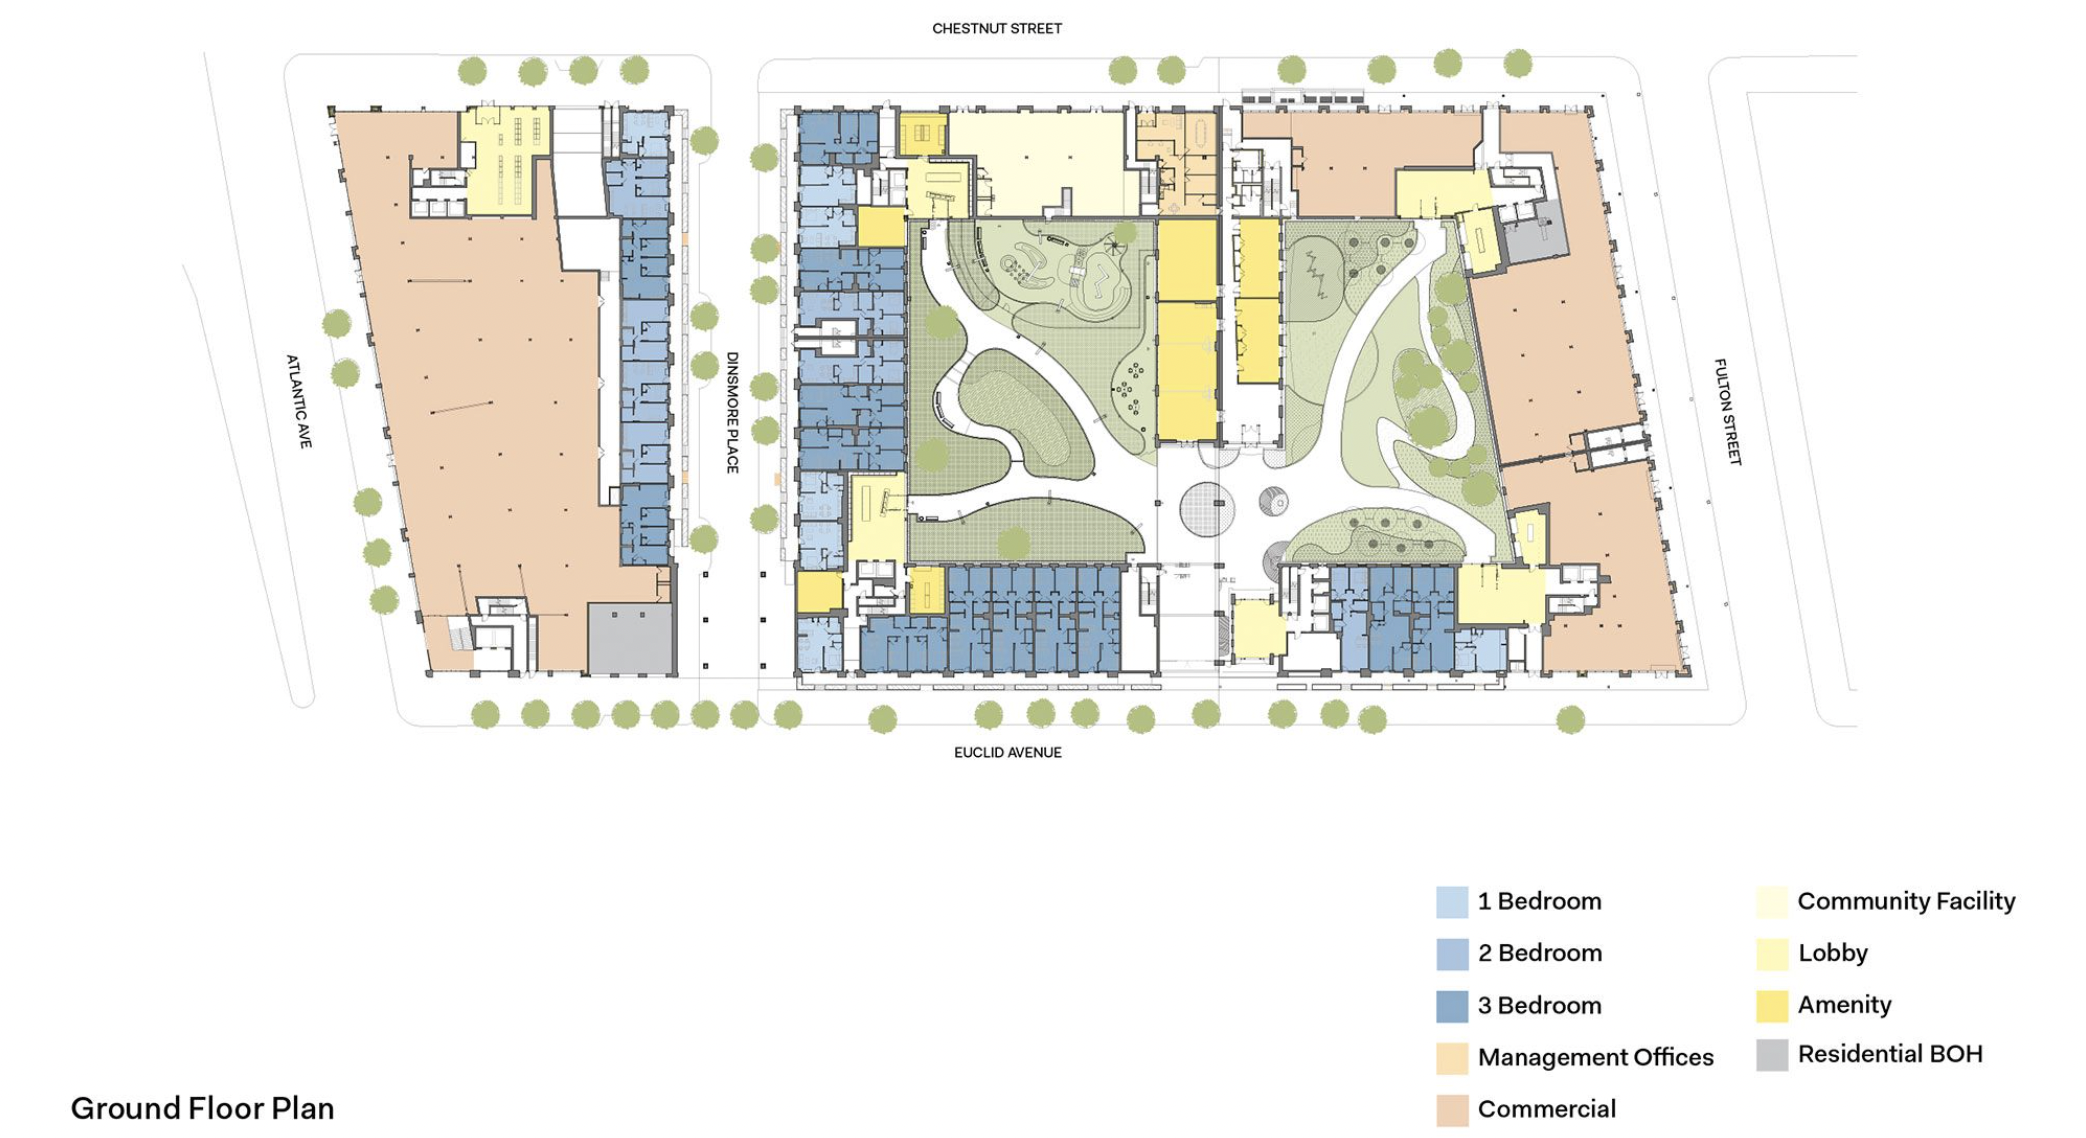 plan keyed to show the facilities and number of units in the complex